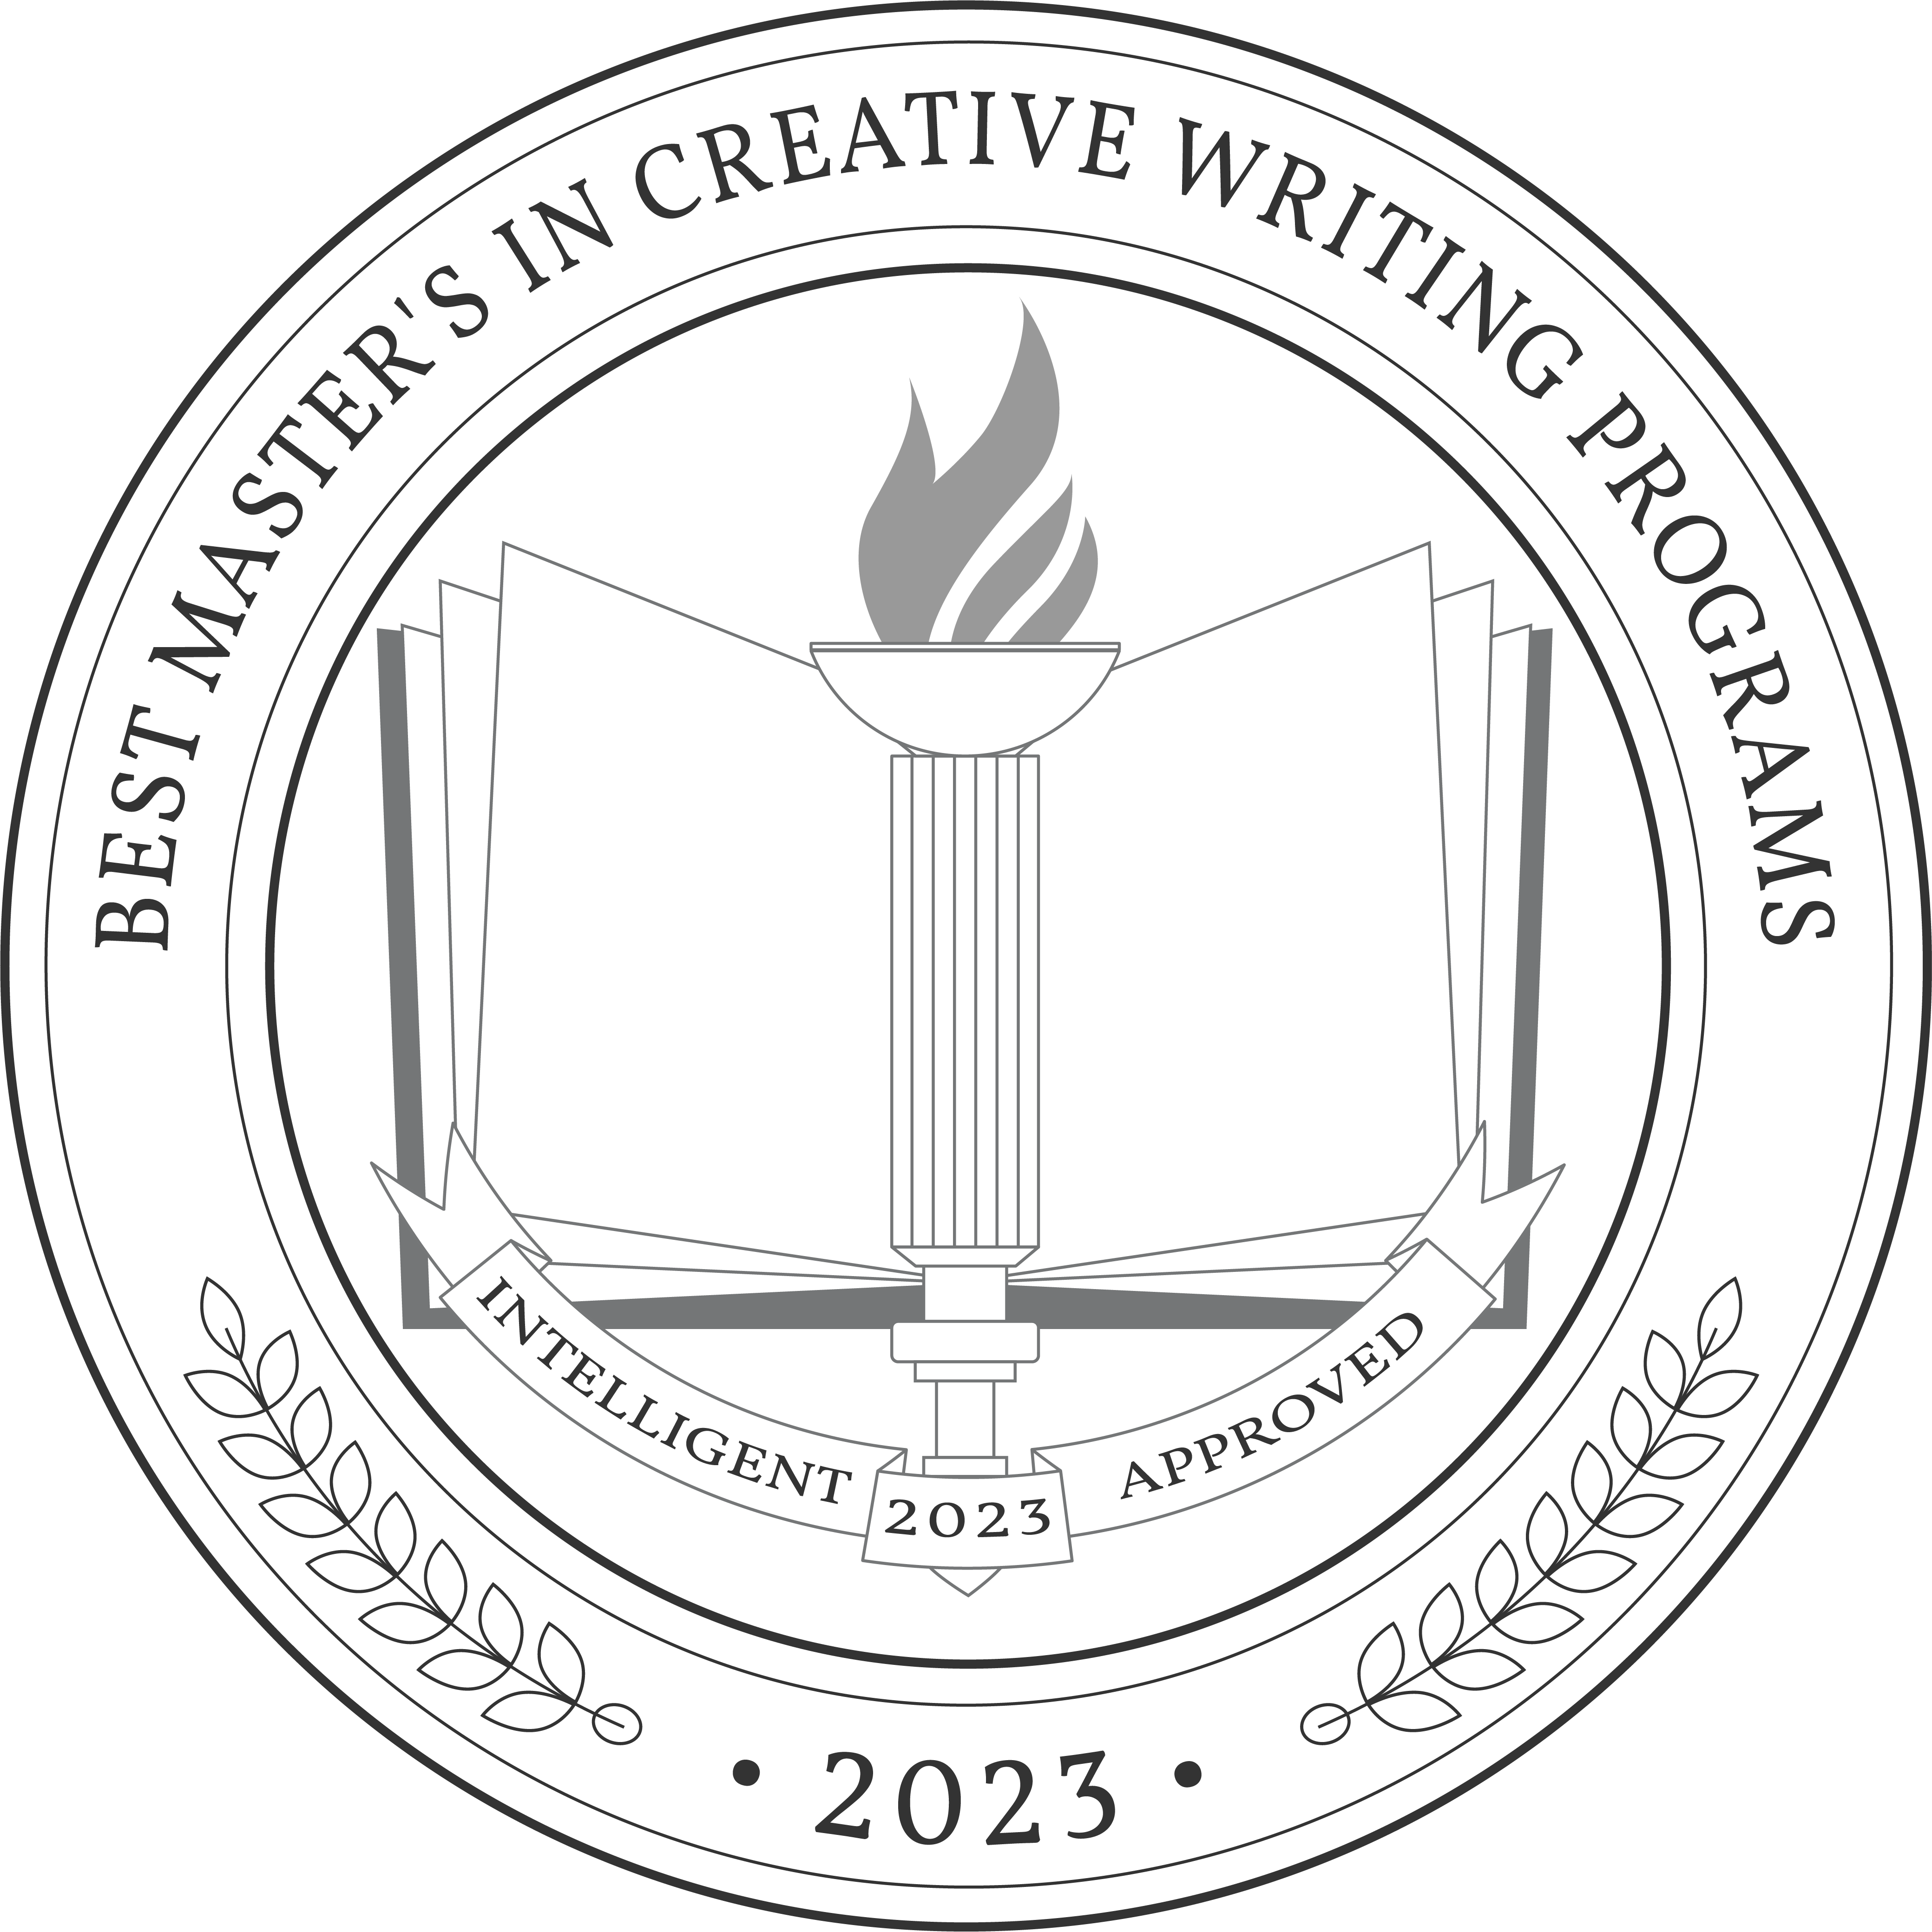 best universities for masters in creative writing